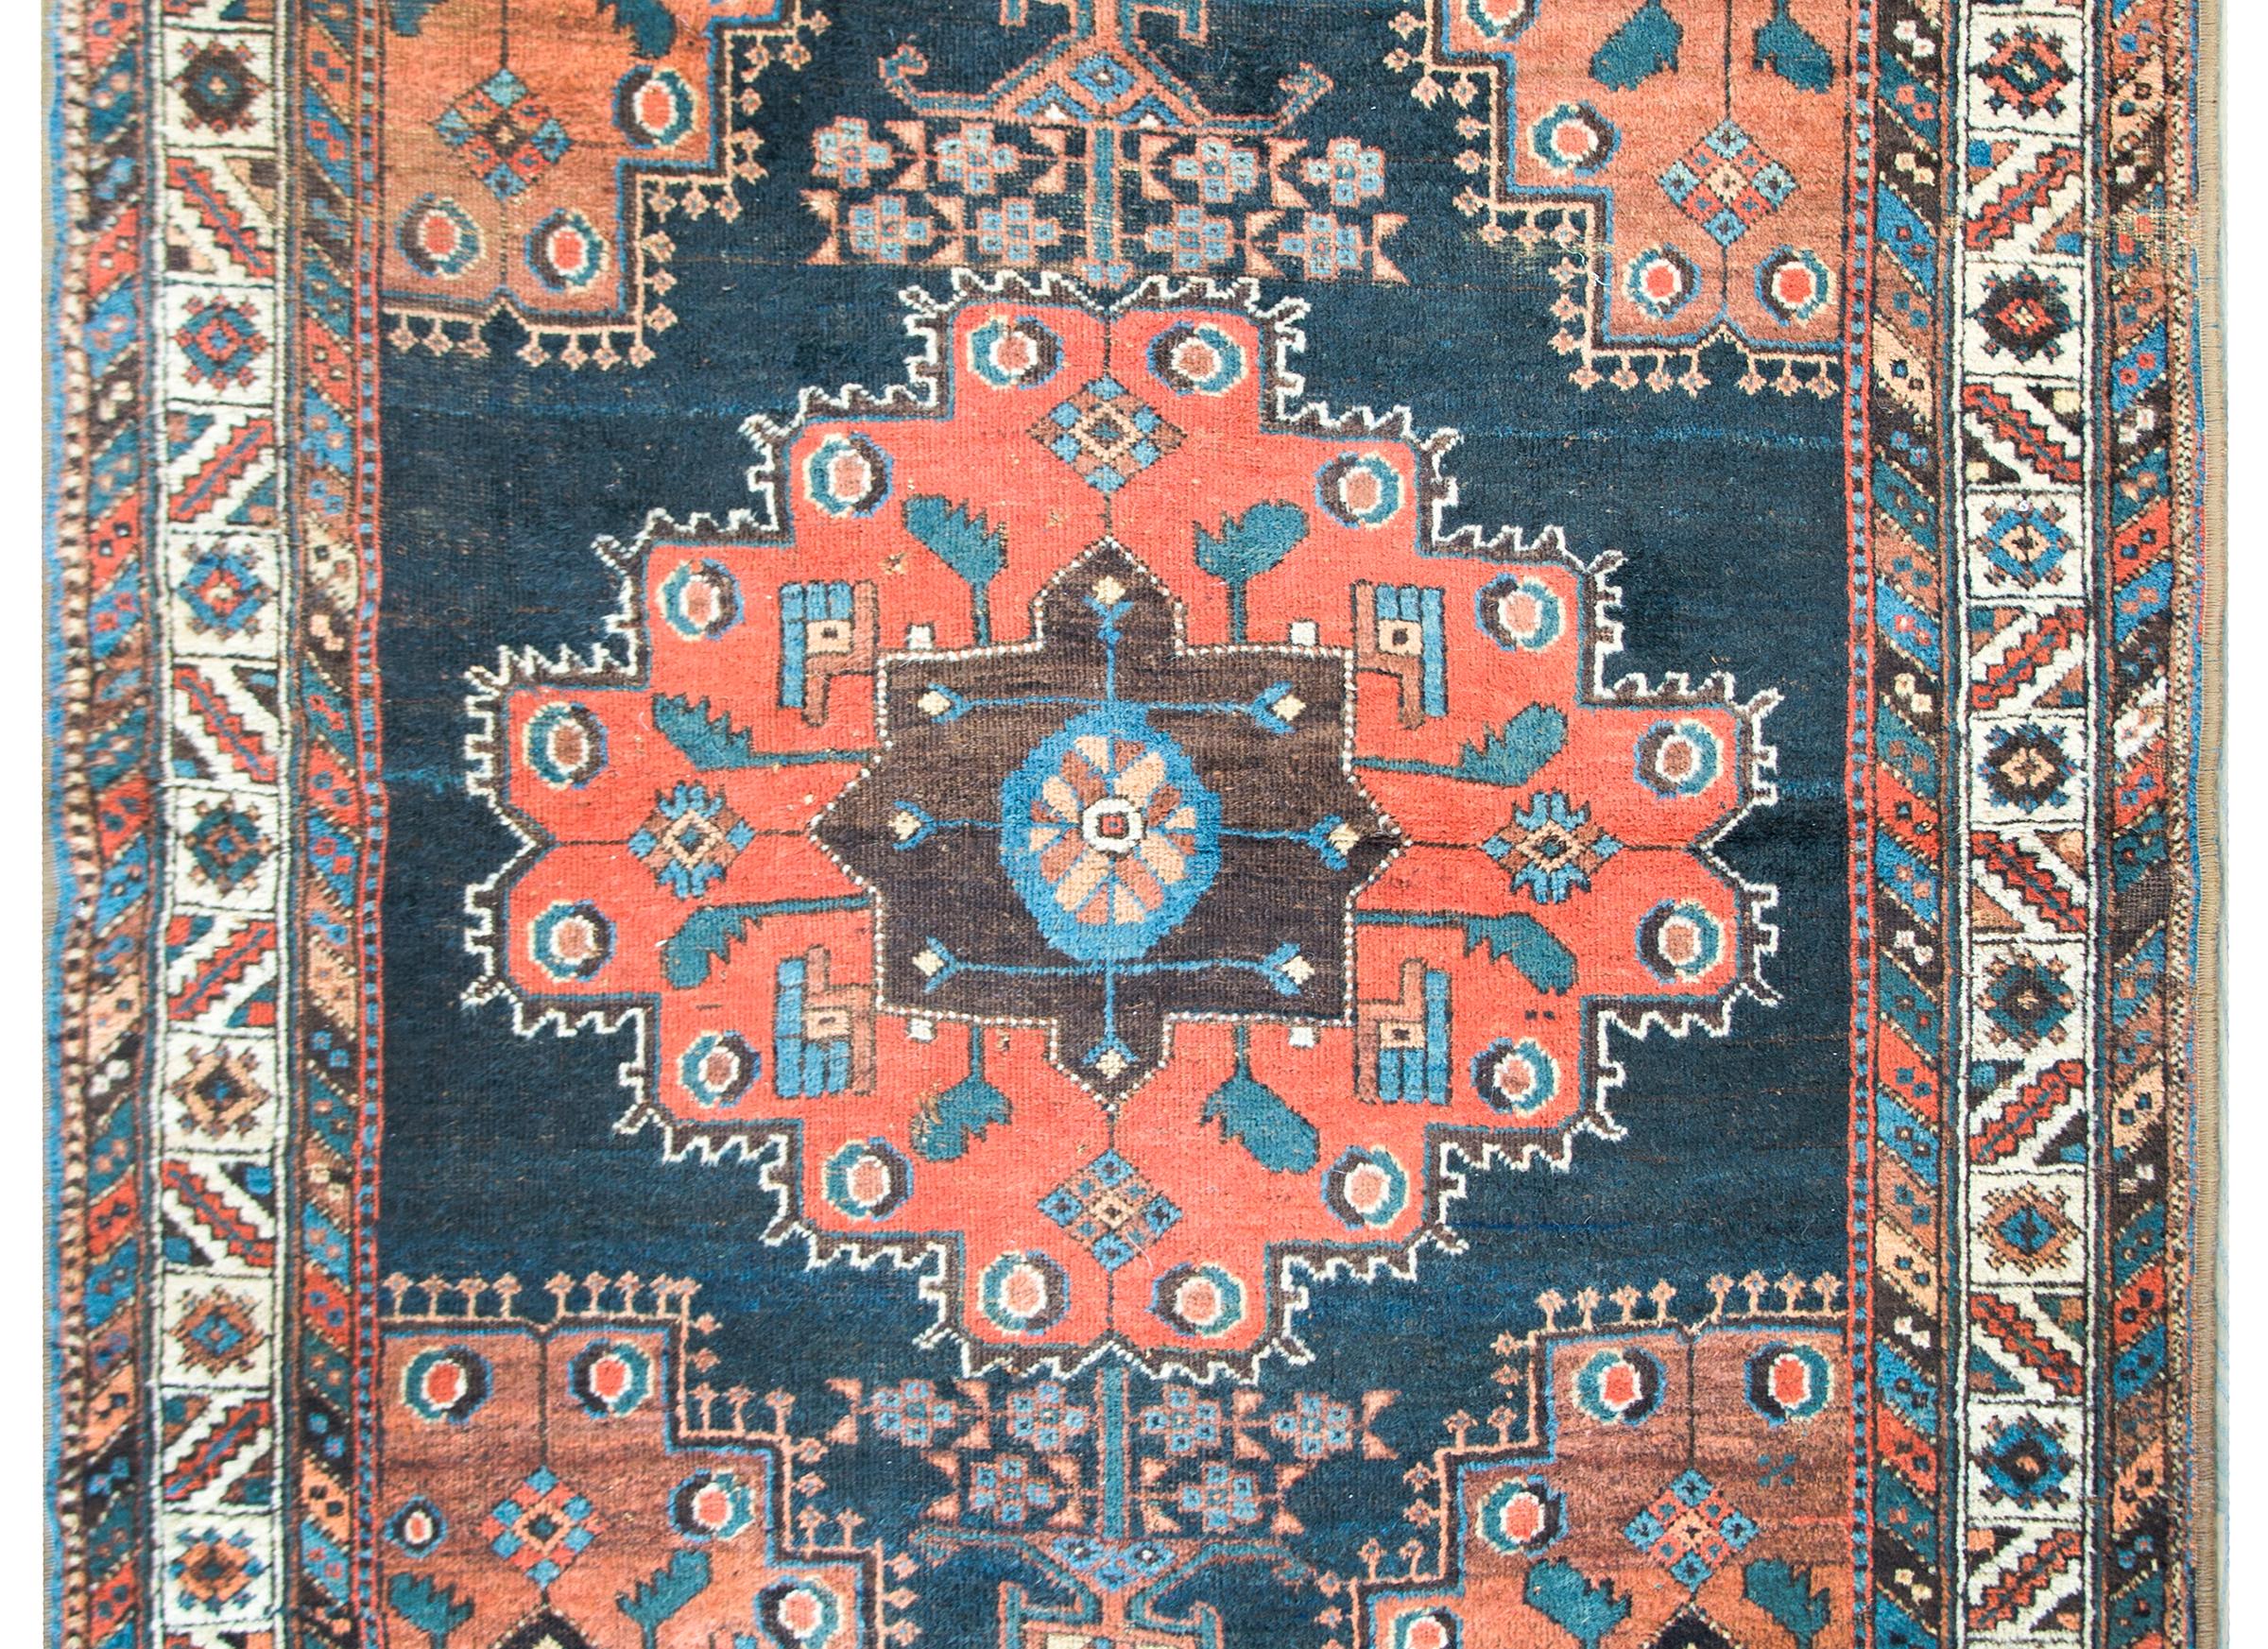 An outstanding early 20th century Persian Afshar rug with a large central medallion with the most wonderful stylized flowers and leaves all woven in indigo, orange, brown, and coral colored wool, and surrounded by a gorgeous border with several